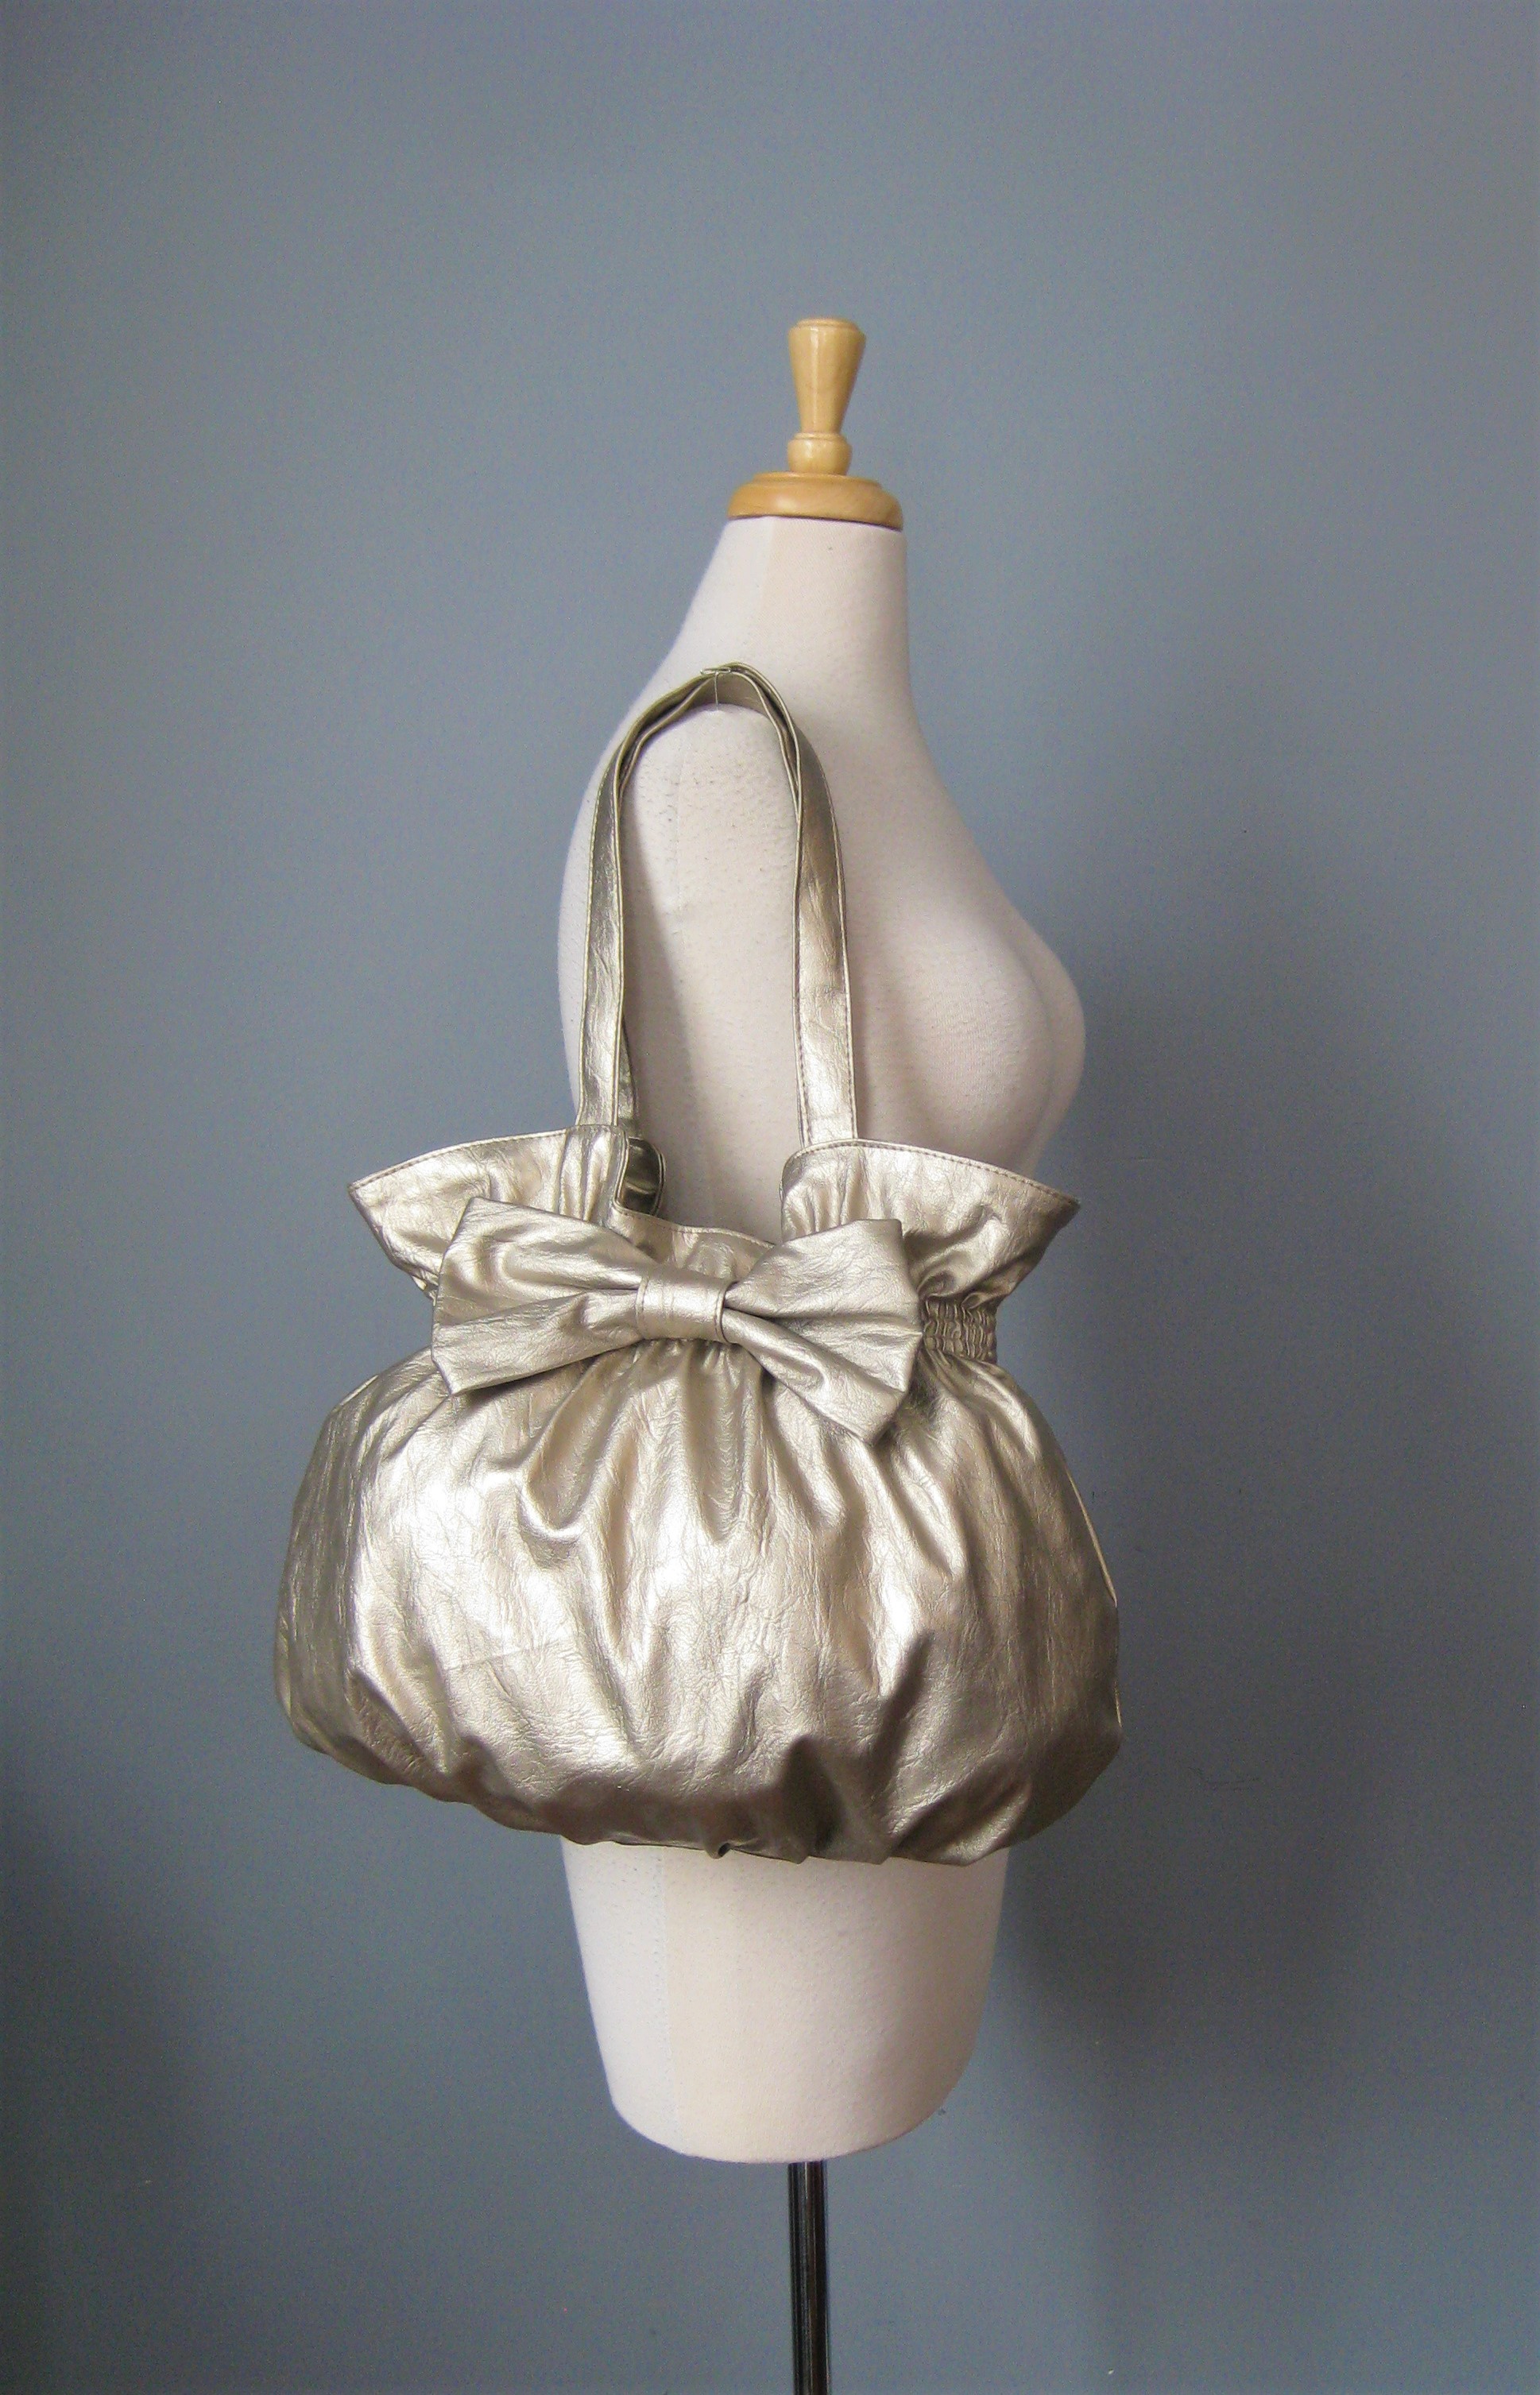 Shimmery Bow Shldr, Silver, Size: None
Super cute and girly, this bag is a large shoulder bag in pale gold metallic vinyl.
It has a pouch shape with a large bow on the front.
Two nice wide straps, magnetic snap closure
lined in light colored fabric with 1 zippered pockets and 2 slip pockets.

No brand ID tag.
Pristine!

thanks for looking1
#41885